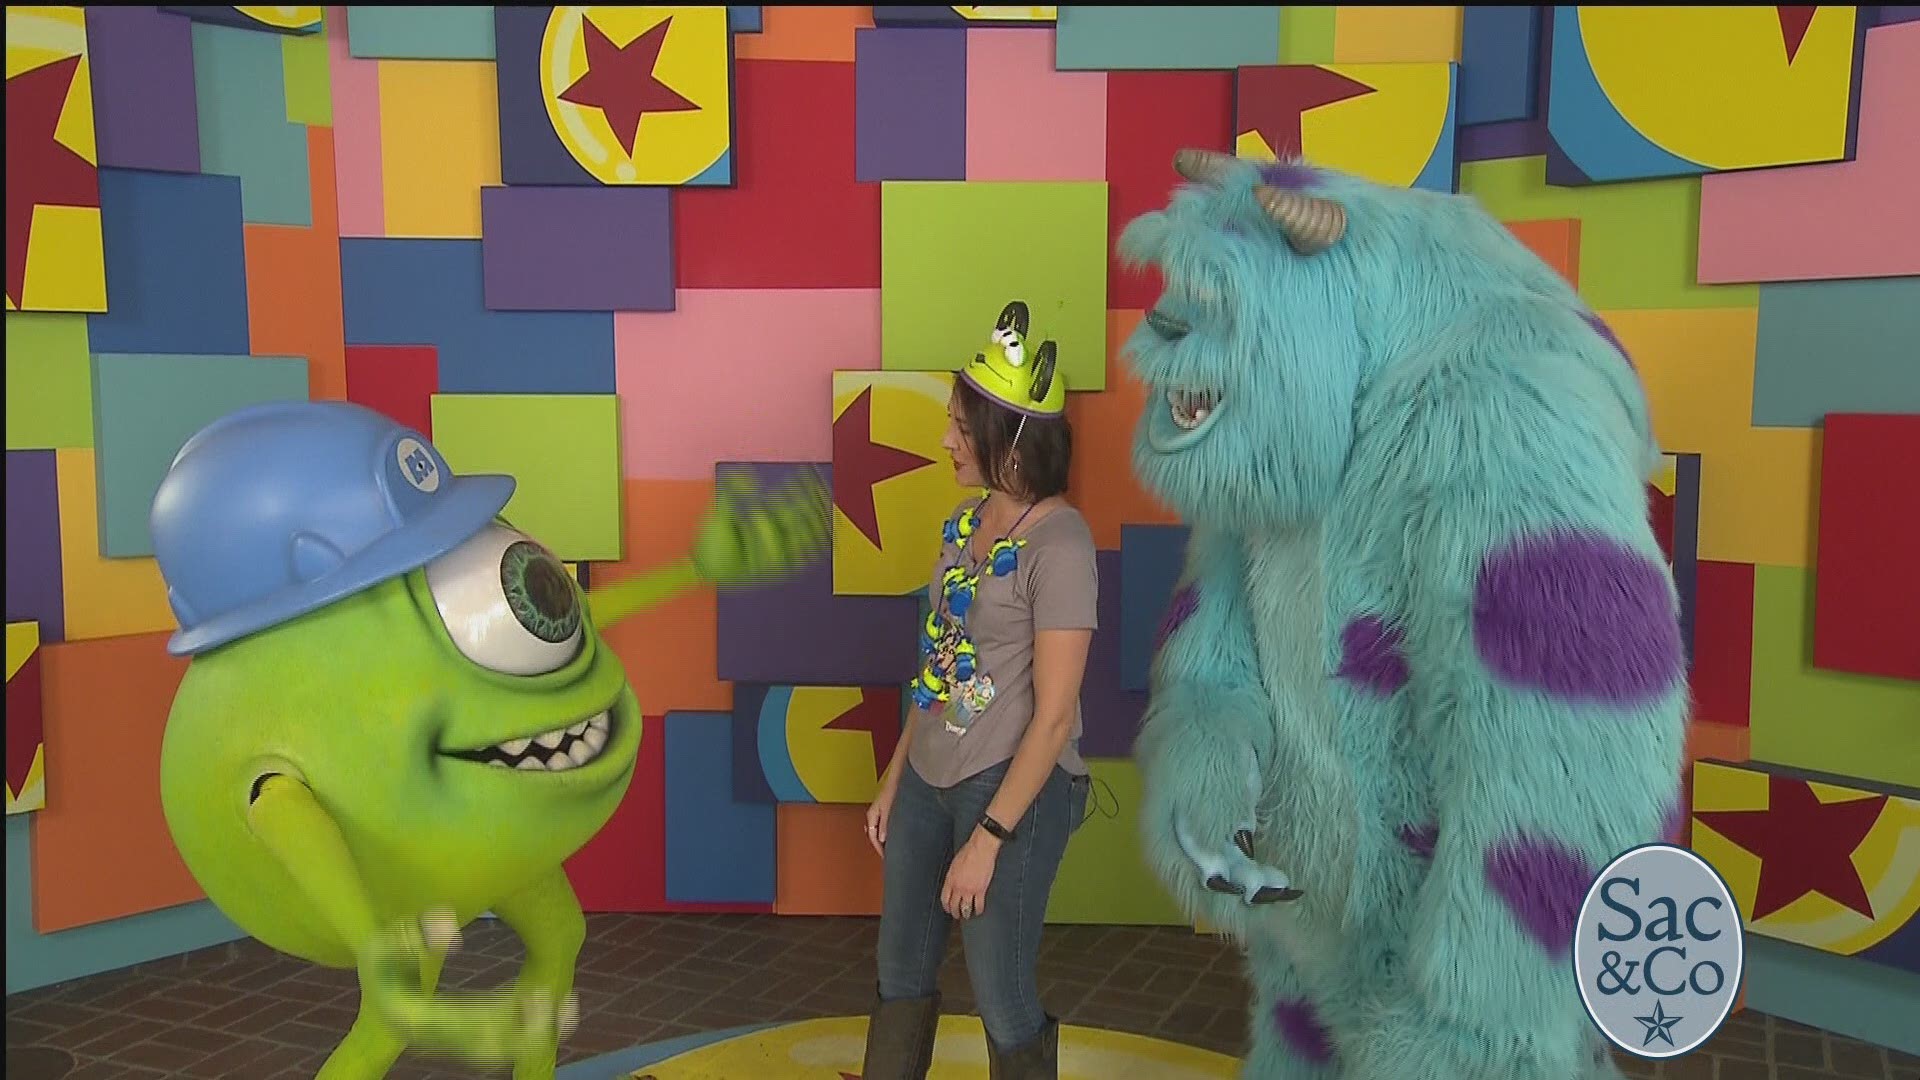 You can catch Mike and Sully along with your other favorite pals at Disney's Pixar Fest!